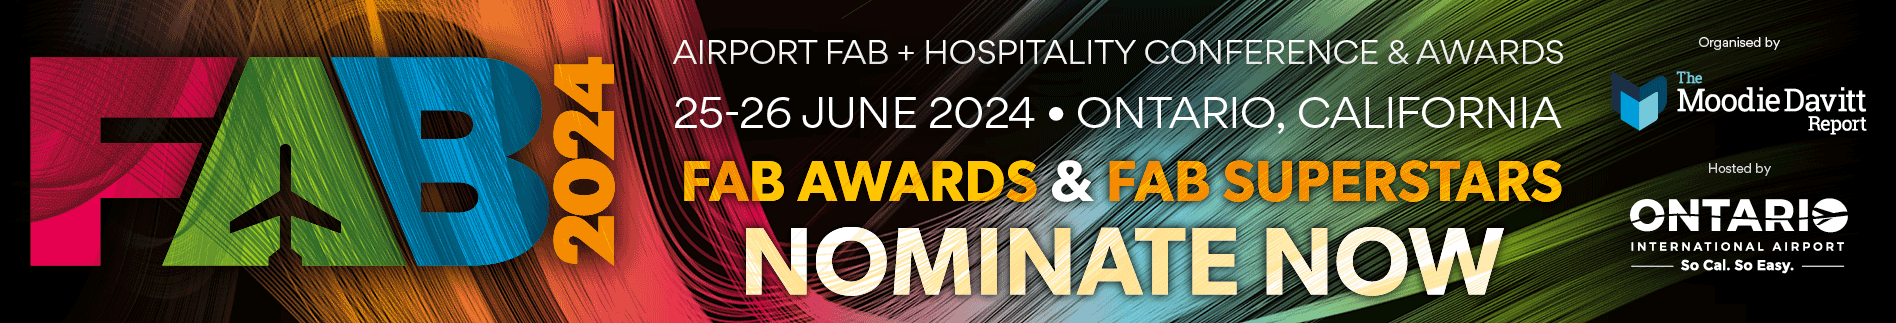 Image for NOMINATE NOW FAB AWARDS AND FAB SUPERSTARS 22.02.24 Tender banner